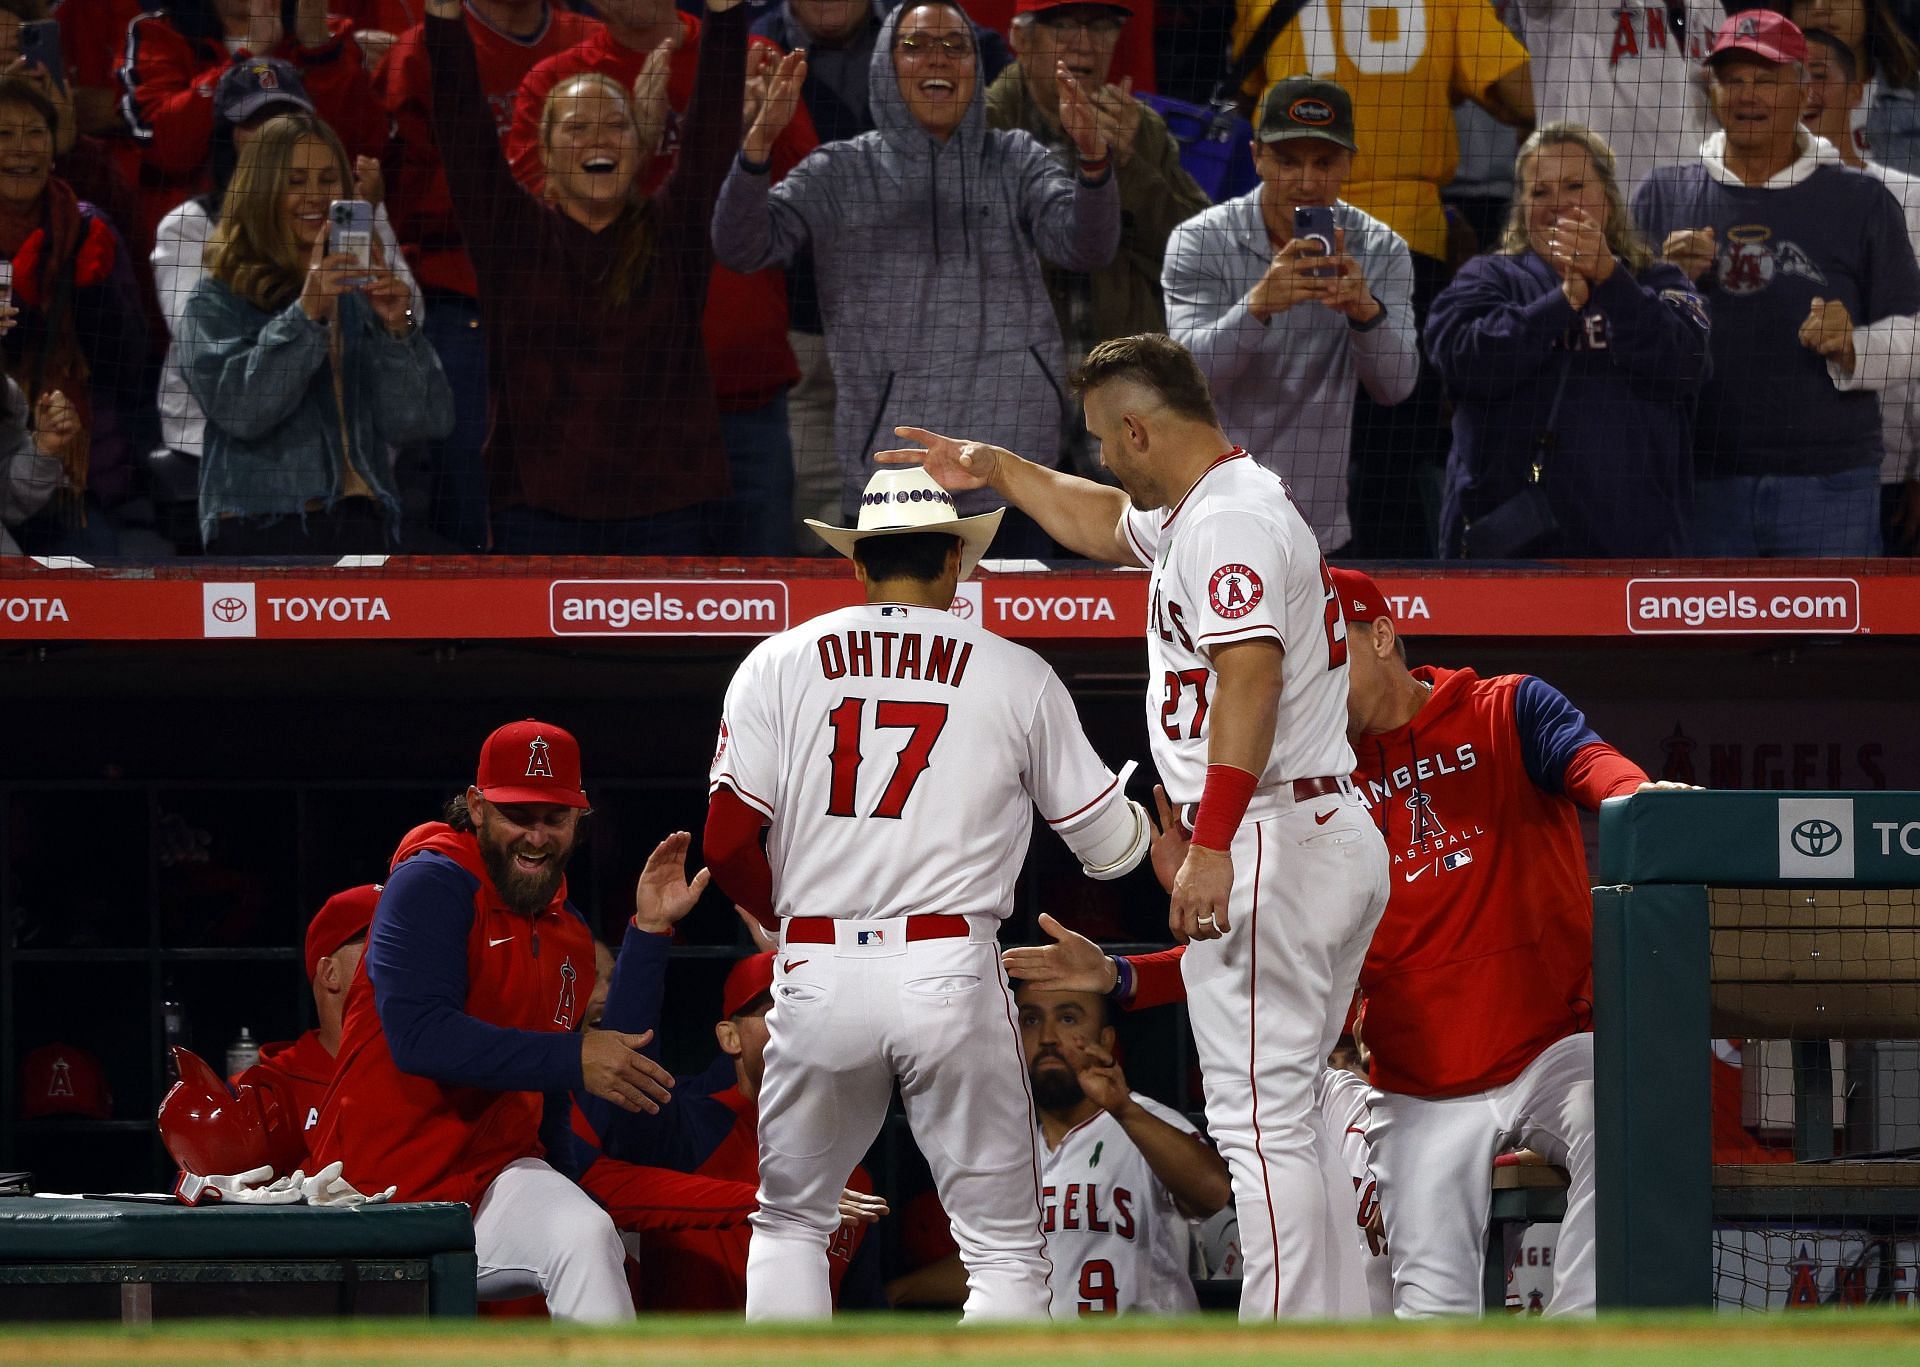 Los Angeles Angels teammates Mike Trout and Shohei Ohtani congratulate each other after a homer by Ohtani over the Tampa Bay Rays last week.